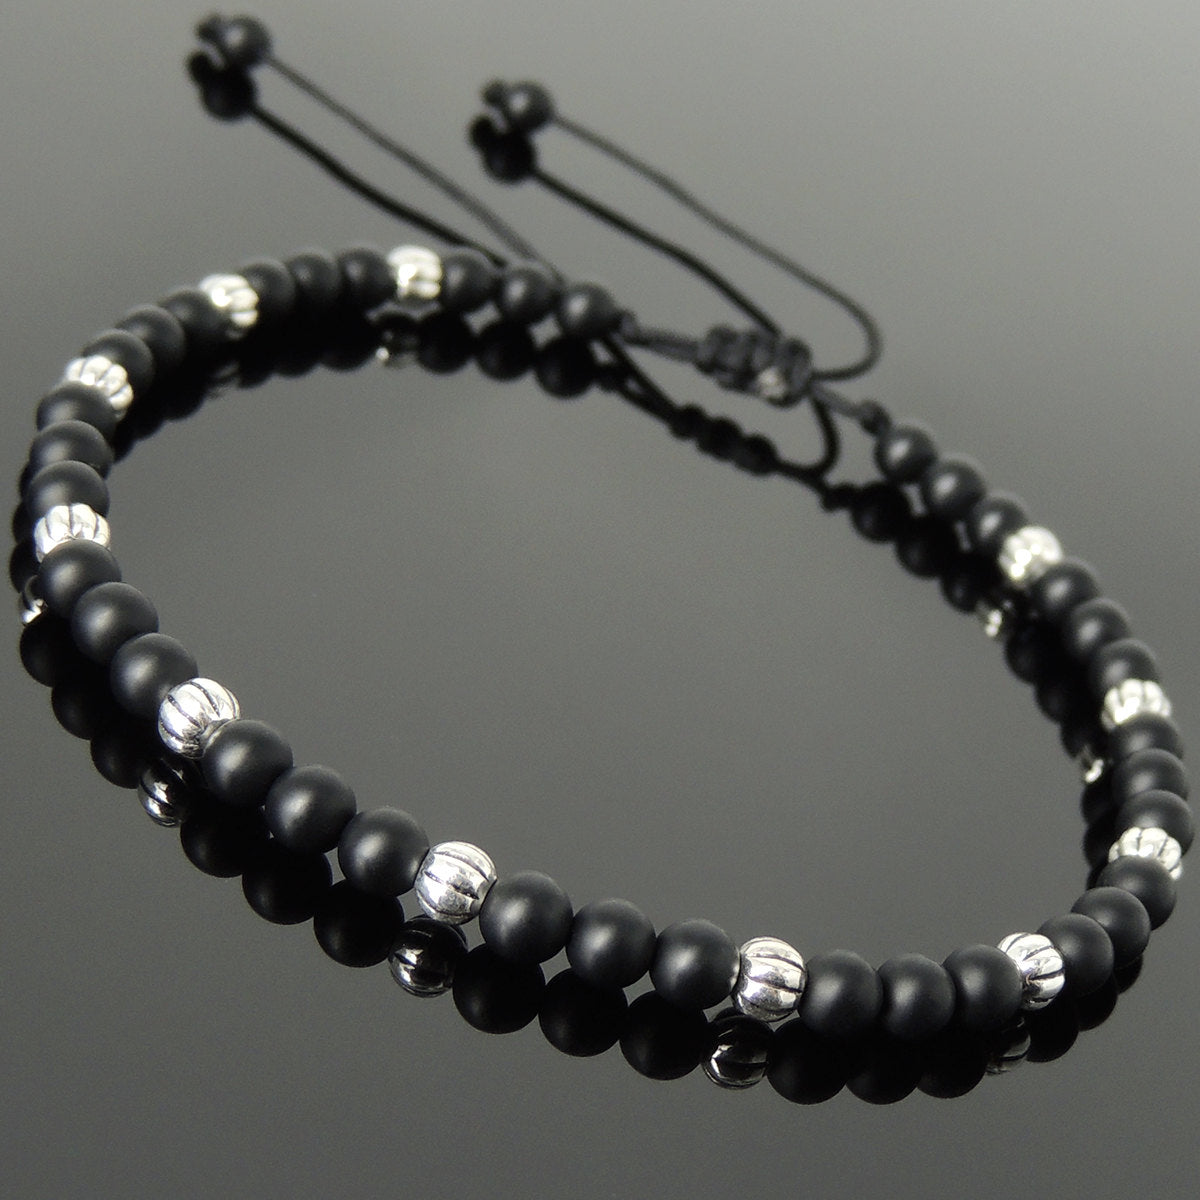 4mm Matte Black Onyx Adjustable Braided Healing Bracelet with S925 Sterling Silver Artisan Beads - Handmade by Gem & Silver